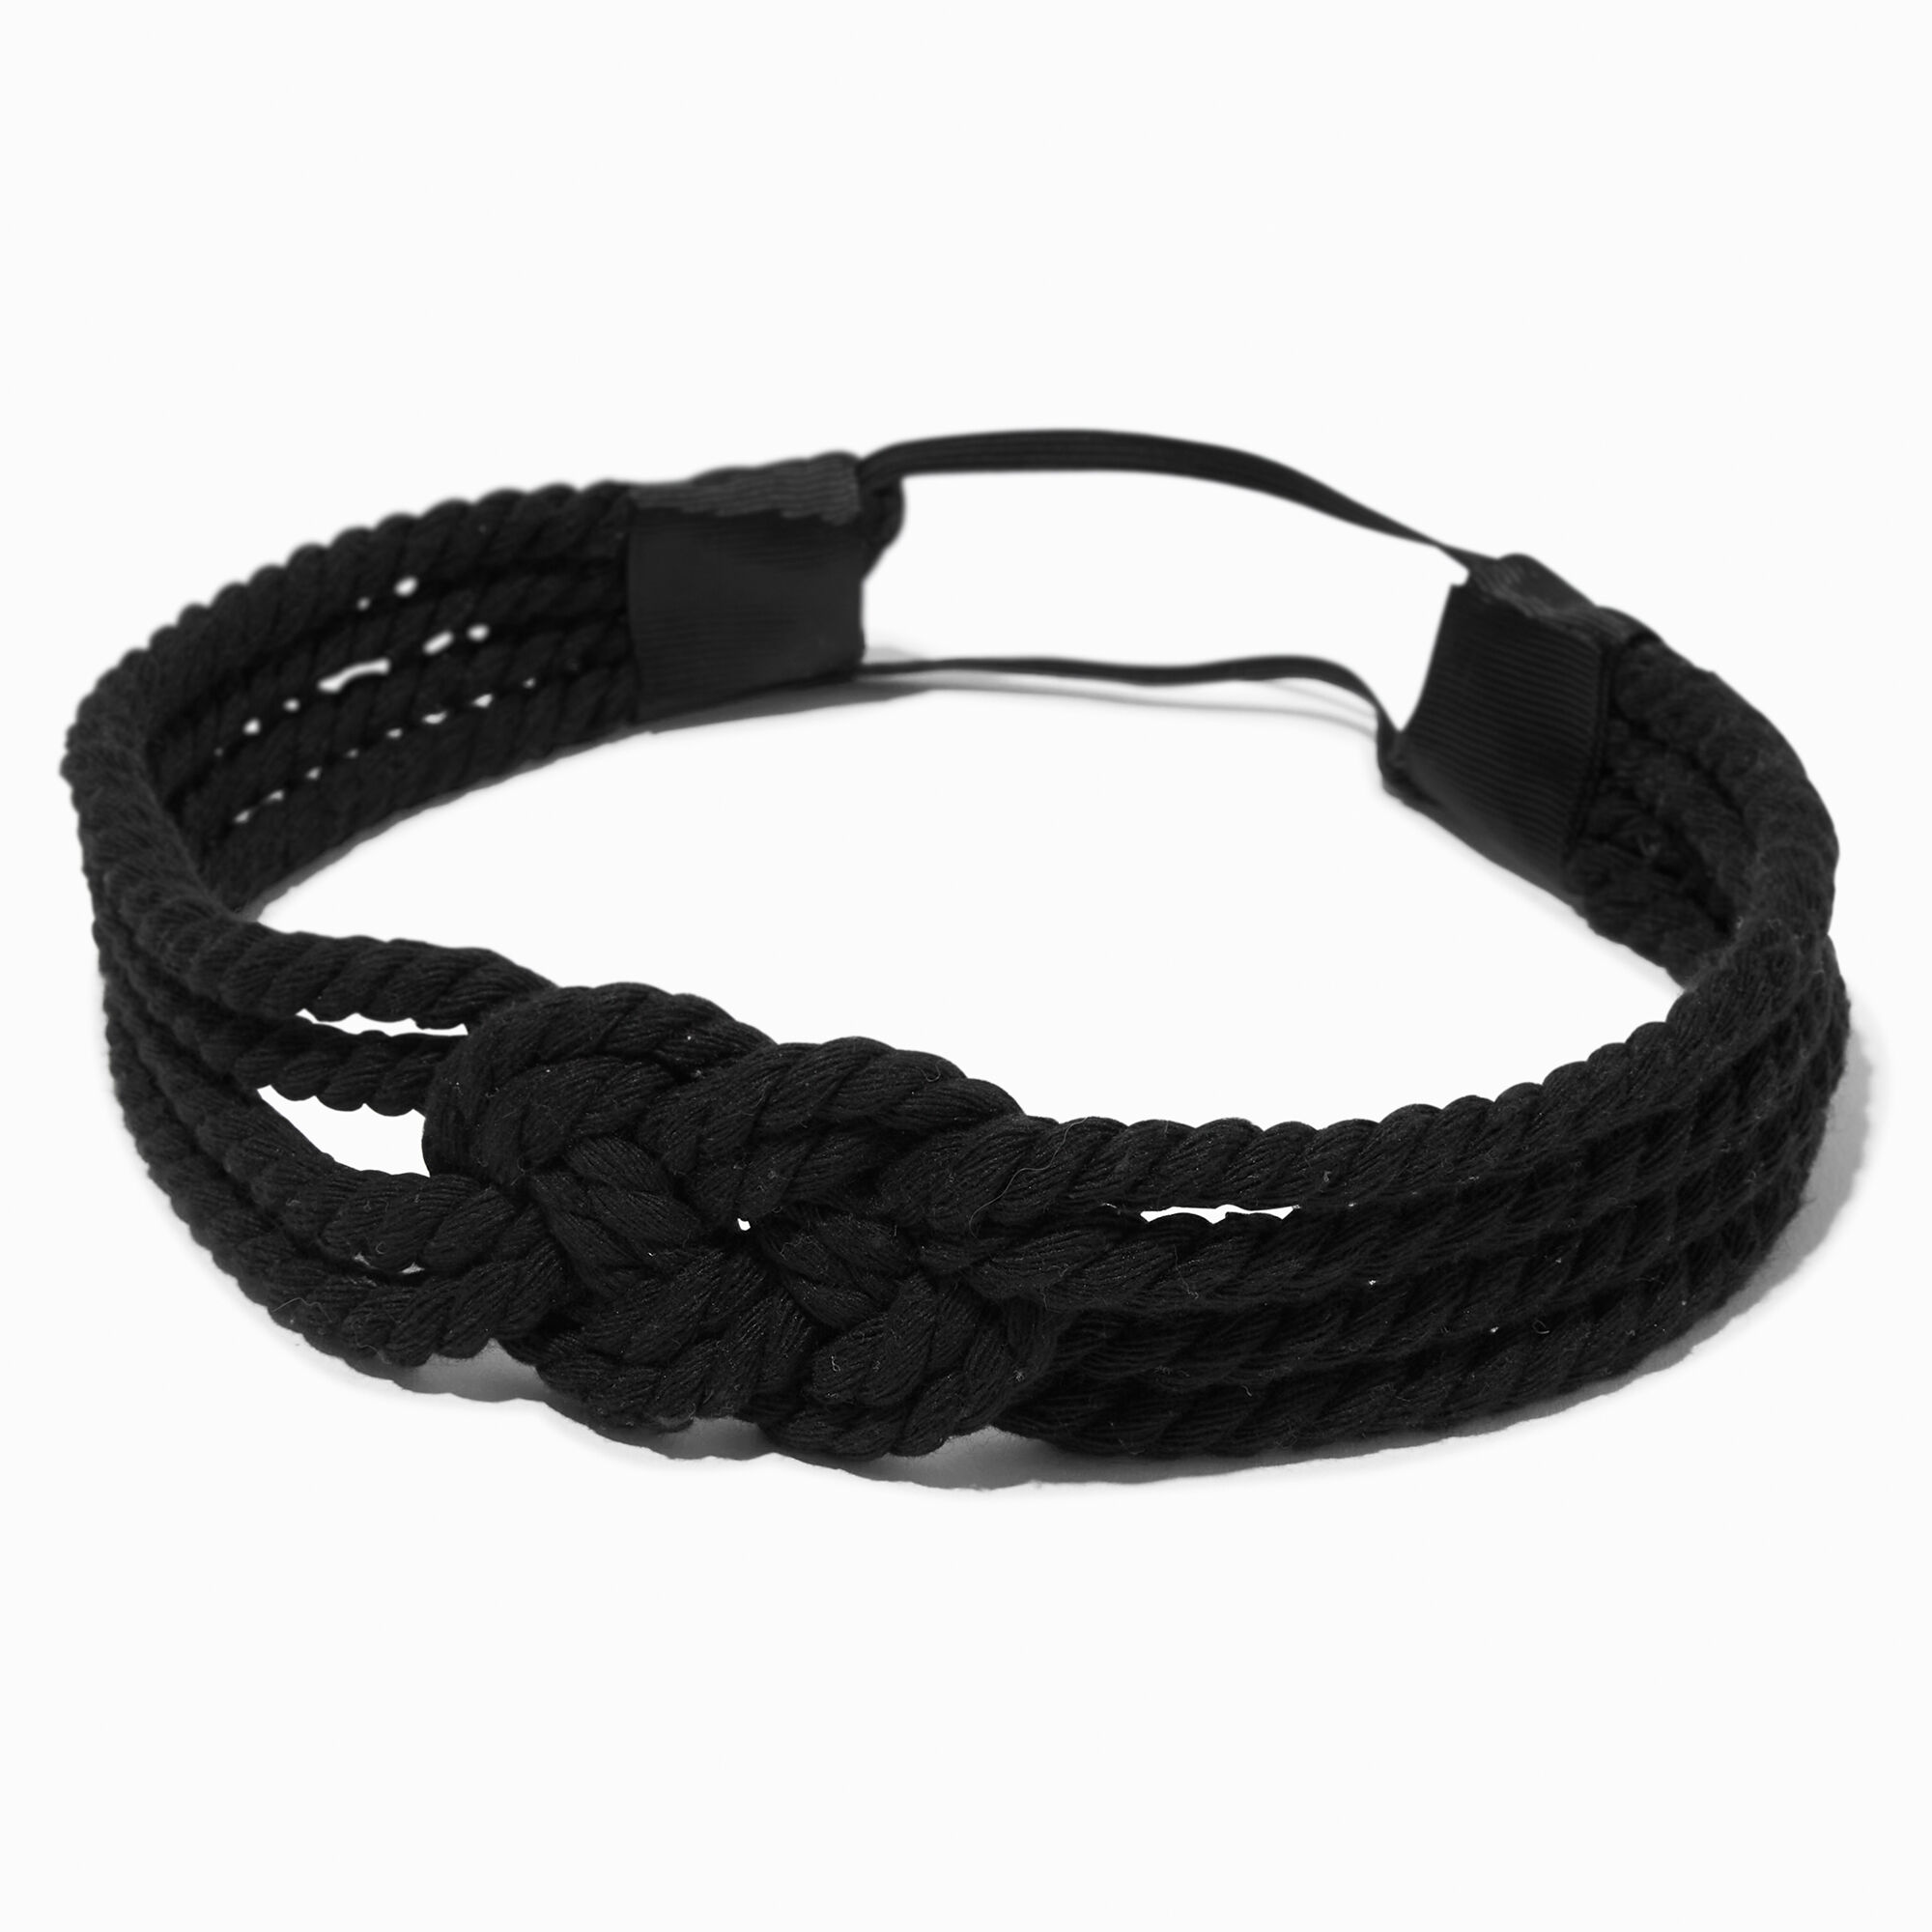 View Claires Rope Knotted Headwrap Black information